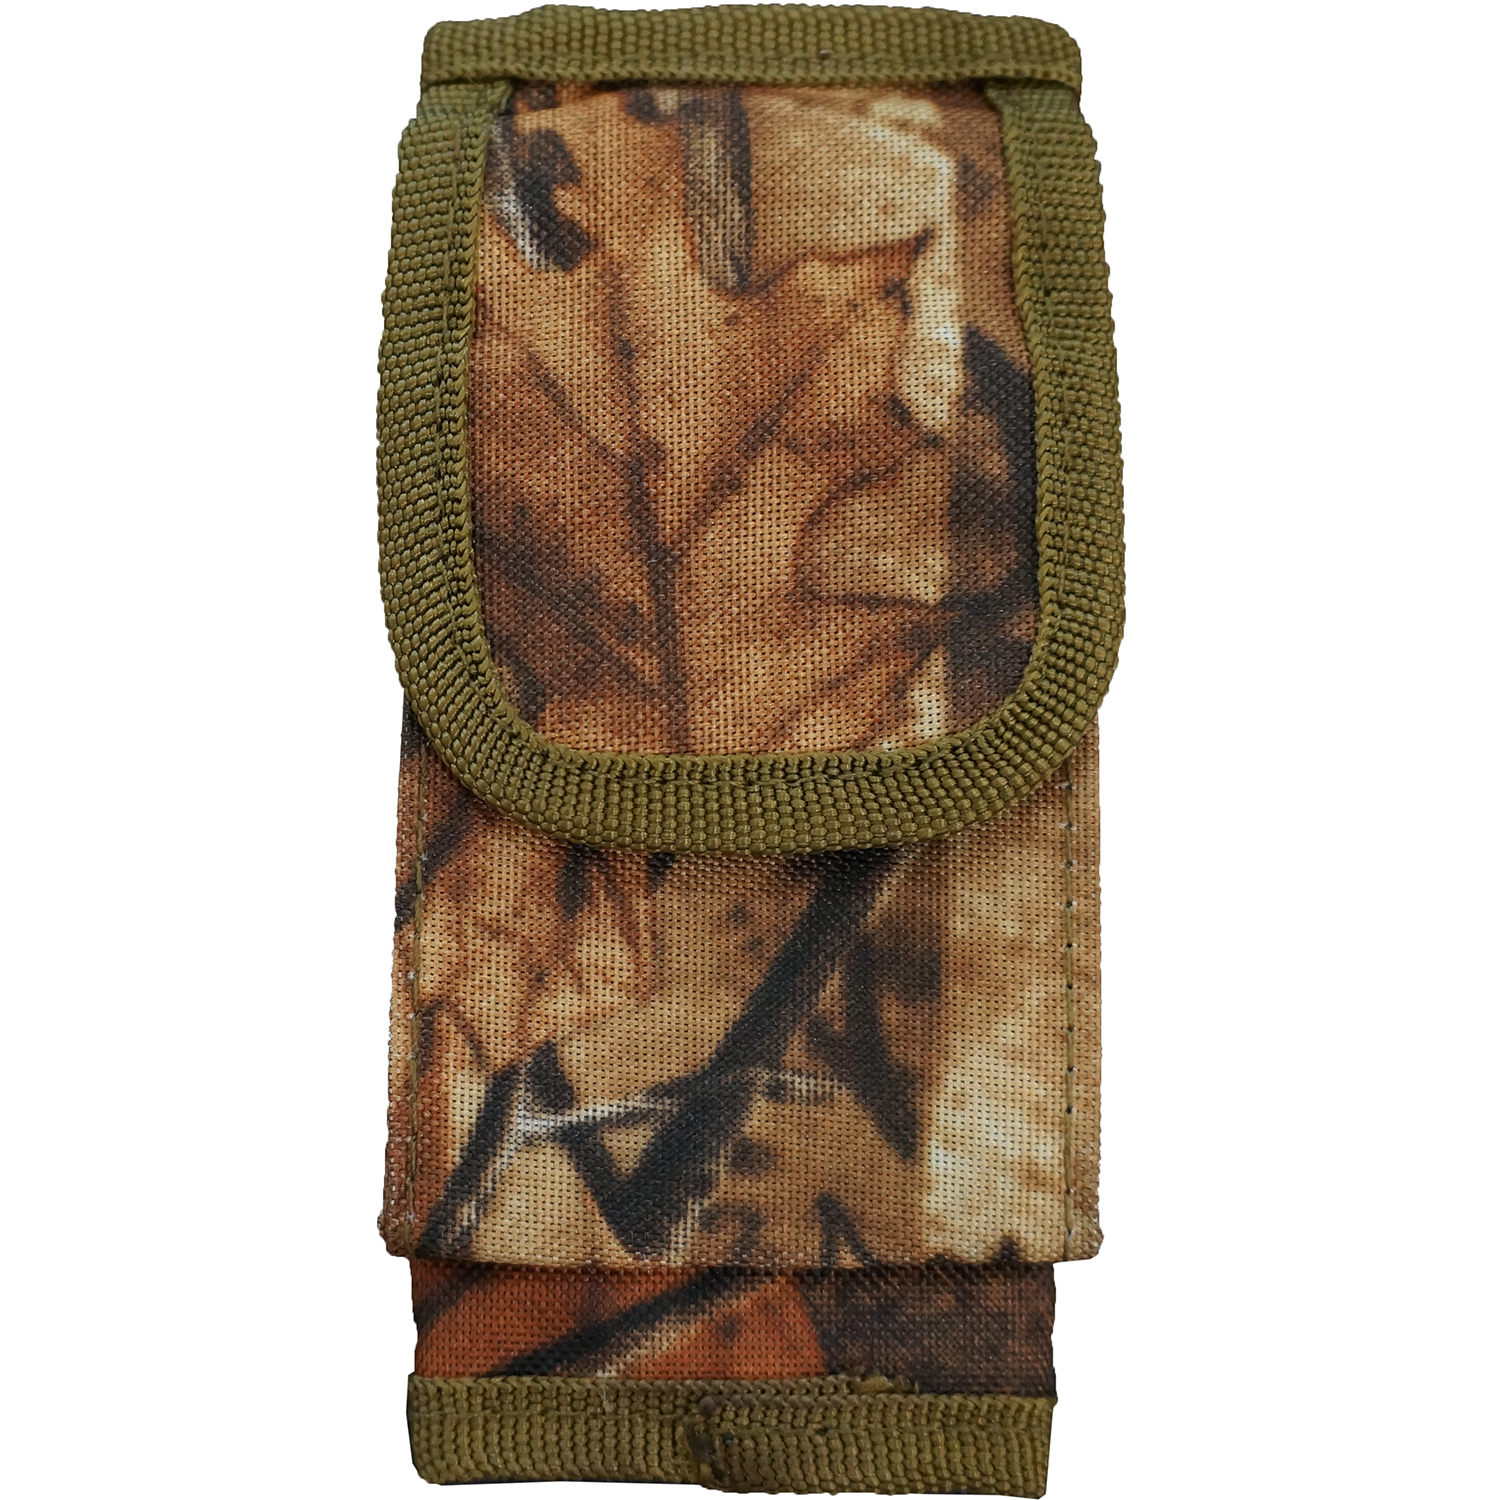 Every Day Carry Tactical Seatbelt Strap Holster Pouch - Oak Wood Camo